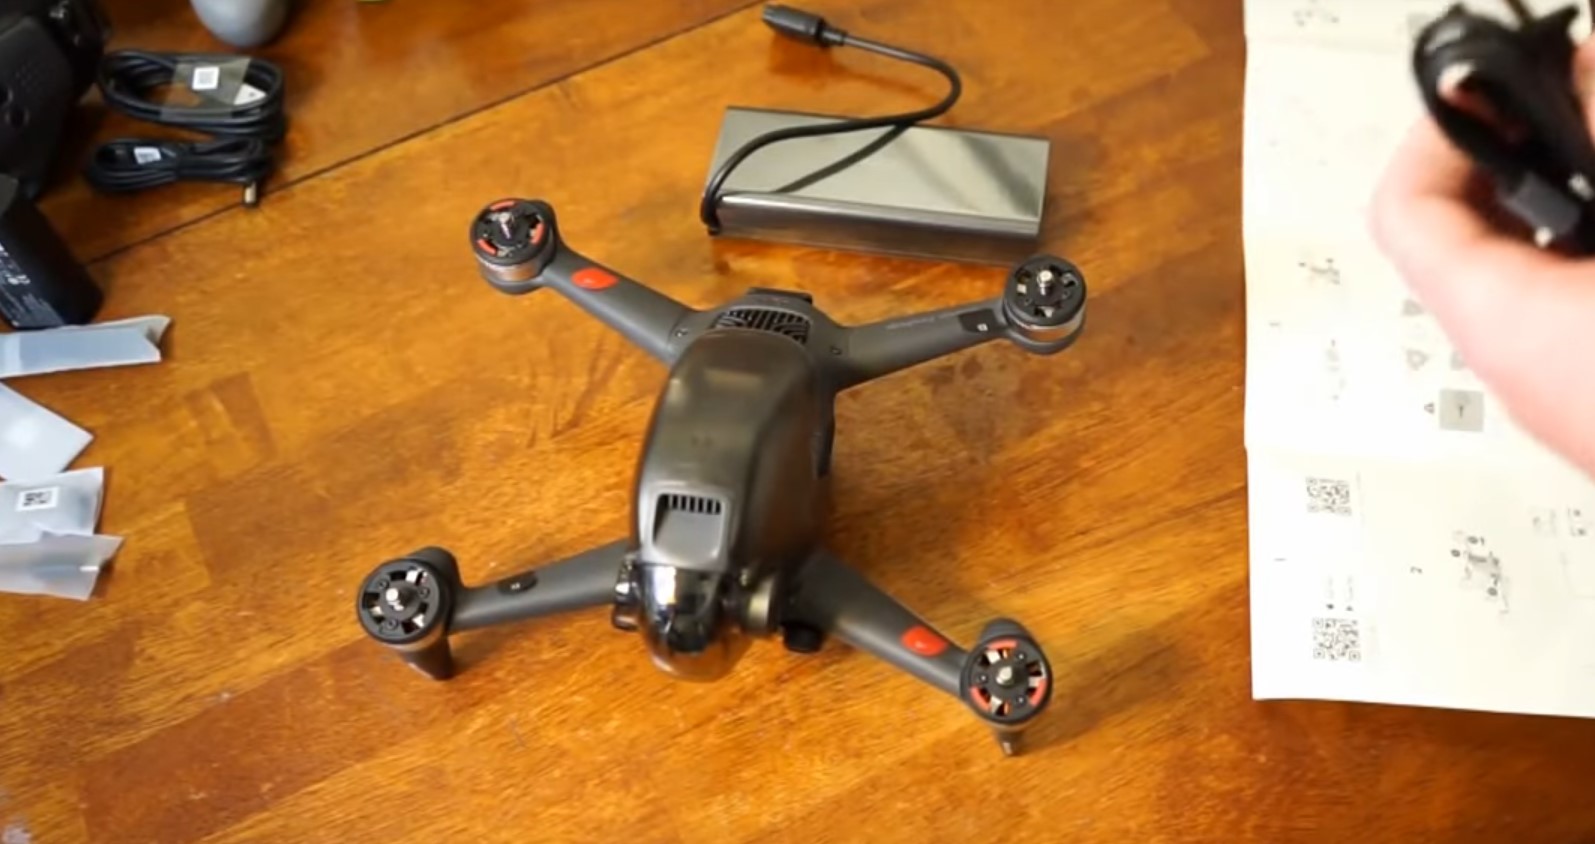 DJI FPV drone and accessories revealed in unboxing video, rumoured